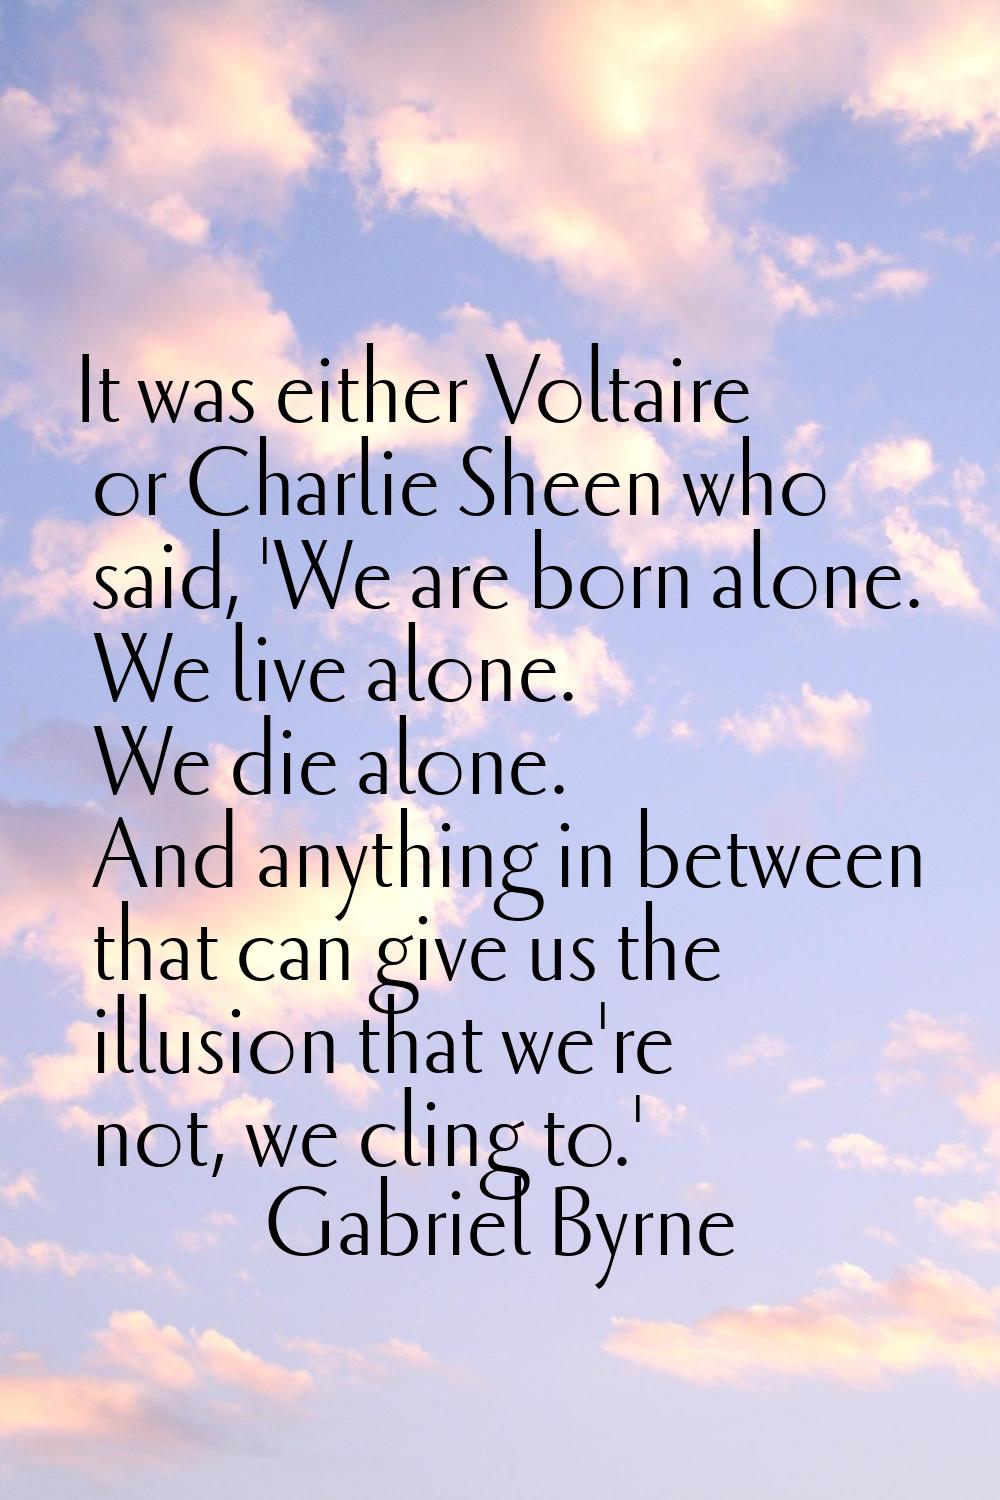 It was either Voltaire or Charlie Sheen who said, 'We are born alone. We live alone. We die alone. 